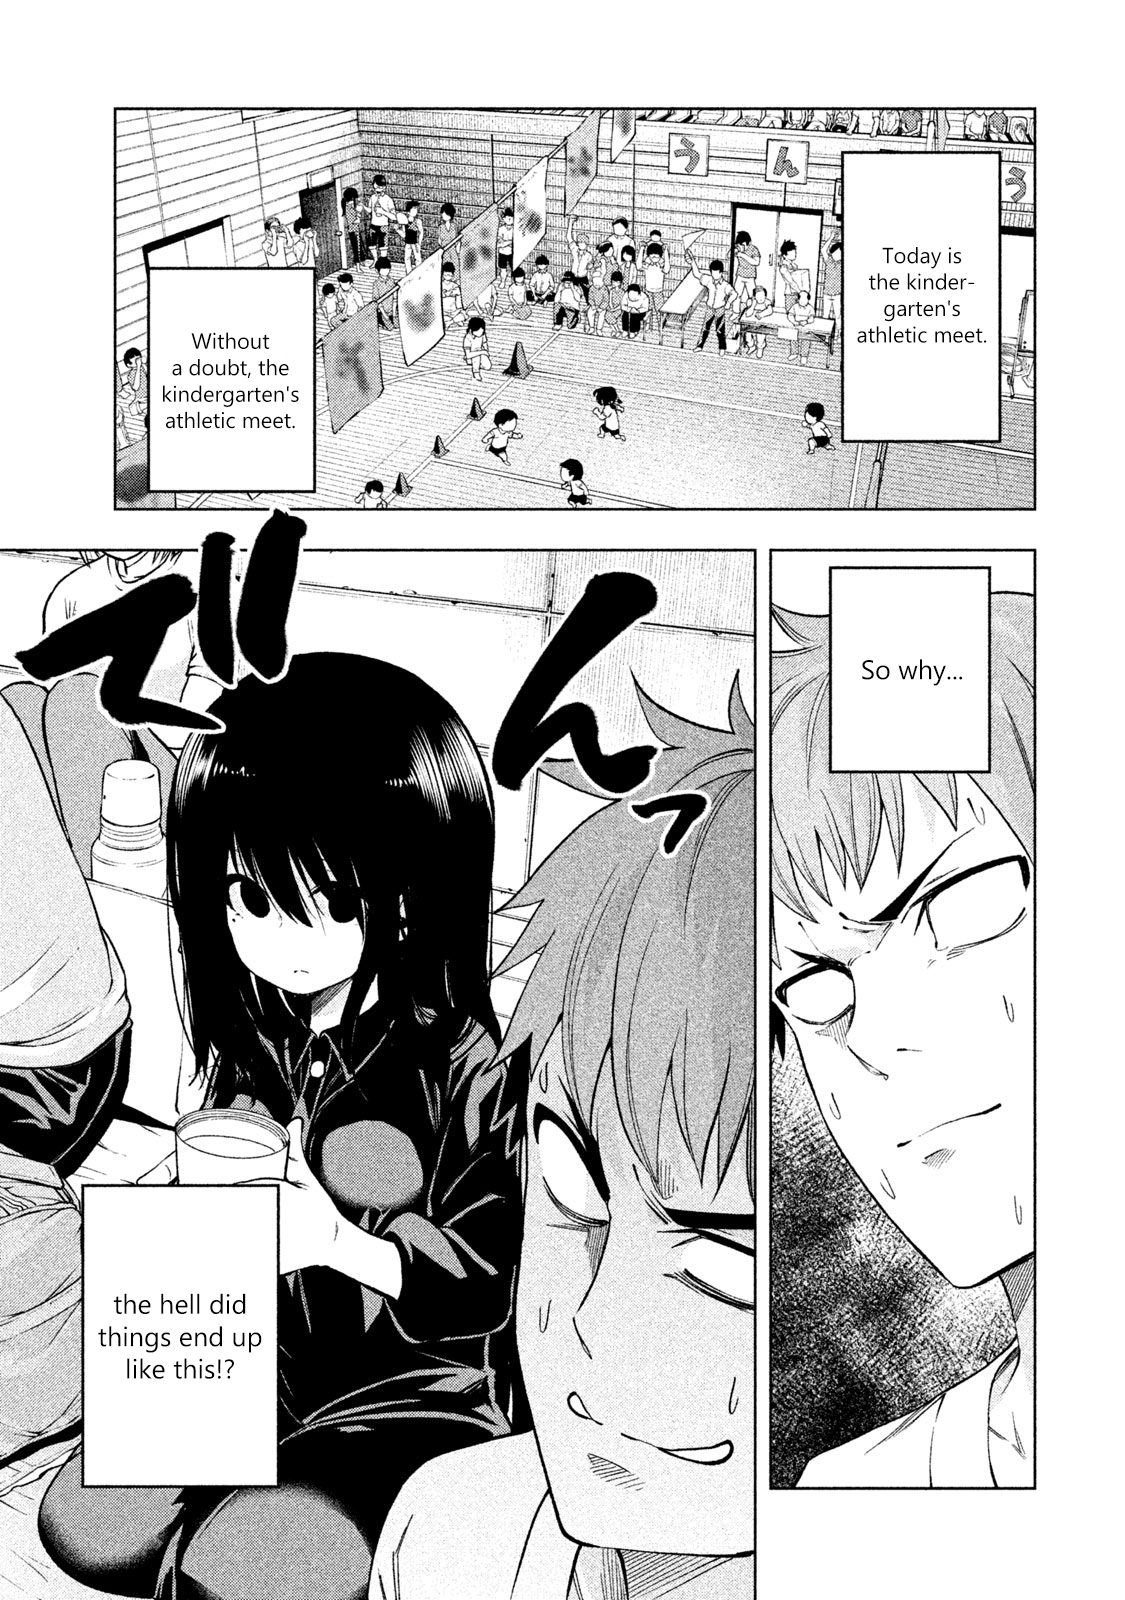 Why Are You Here Sensei!? - Page 1